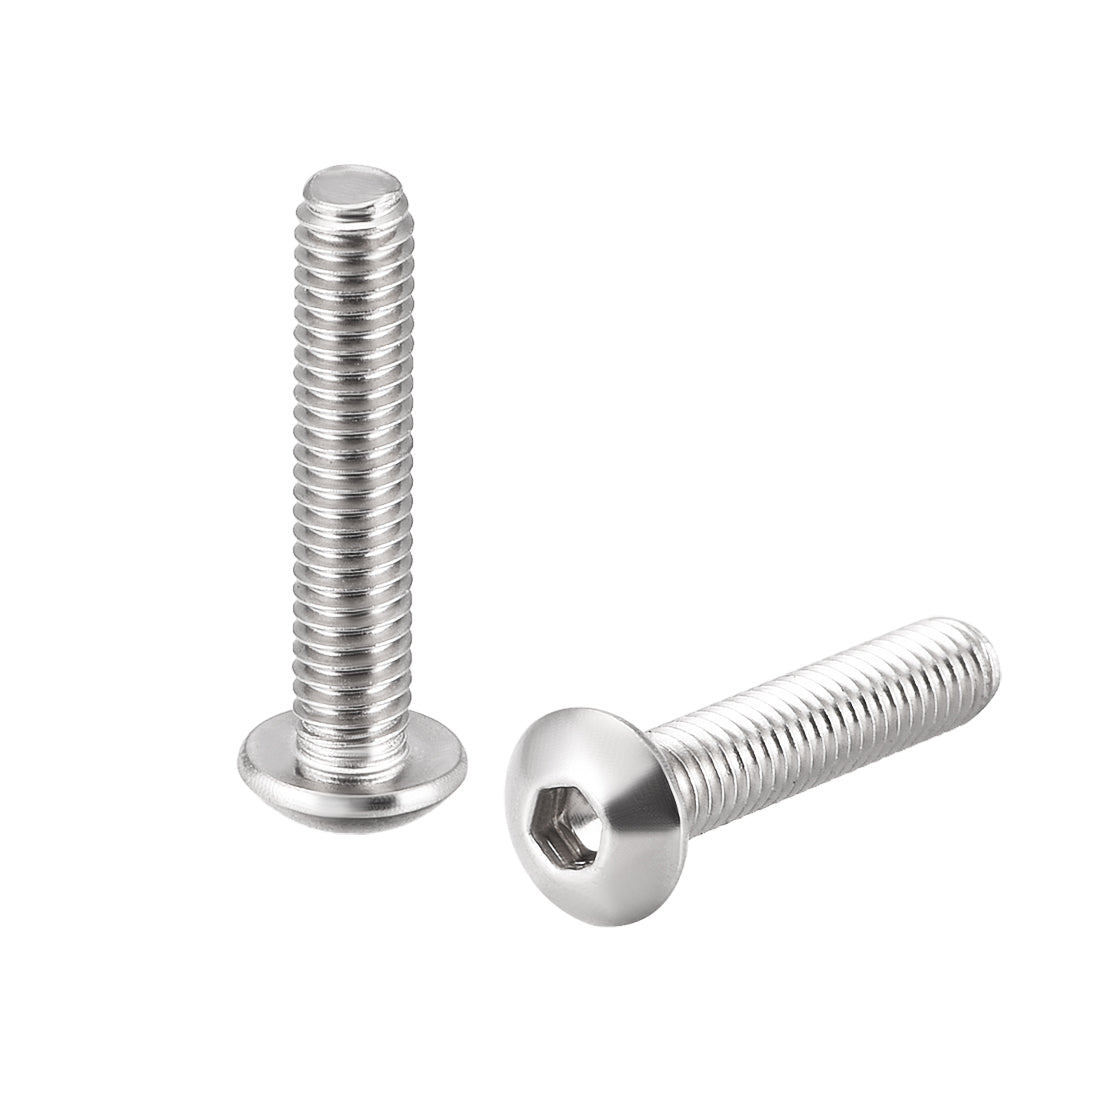 uxcell Uxcell M4x20mm Machine Screws Hex Socket Round Head Screw 304 Stainless Steel Fasteners Bolts 20pcs